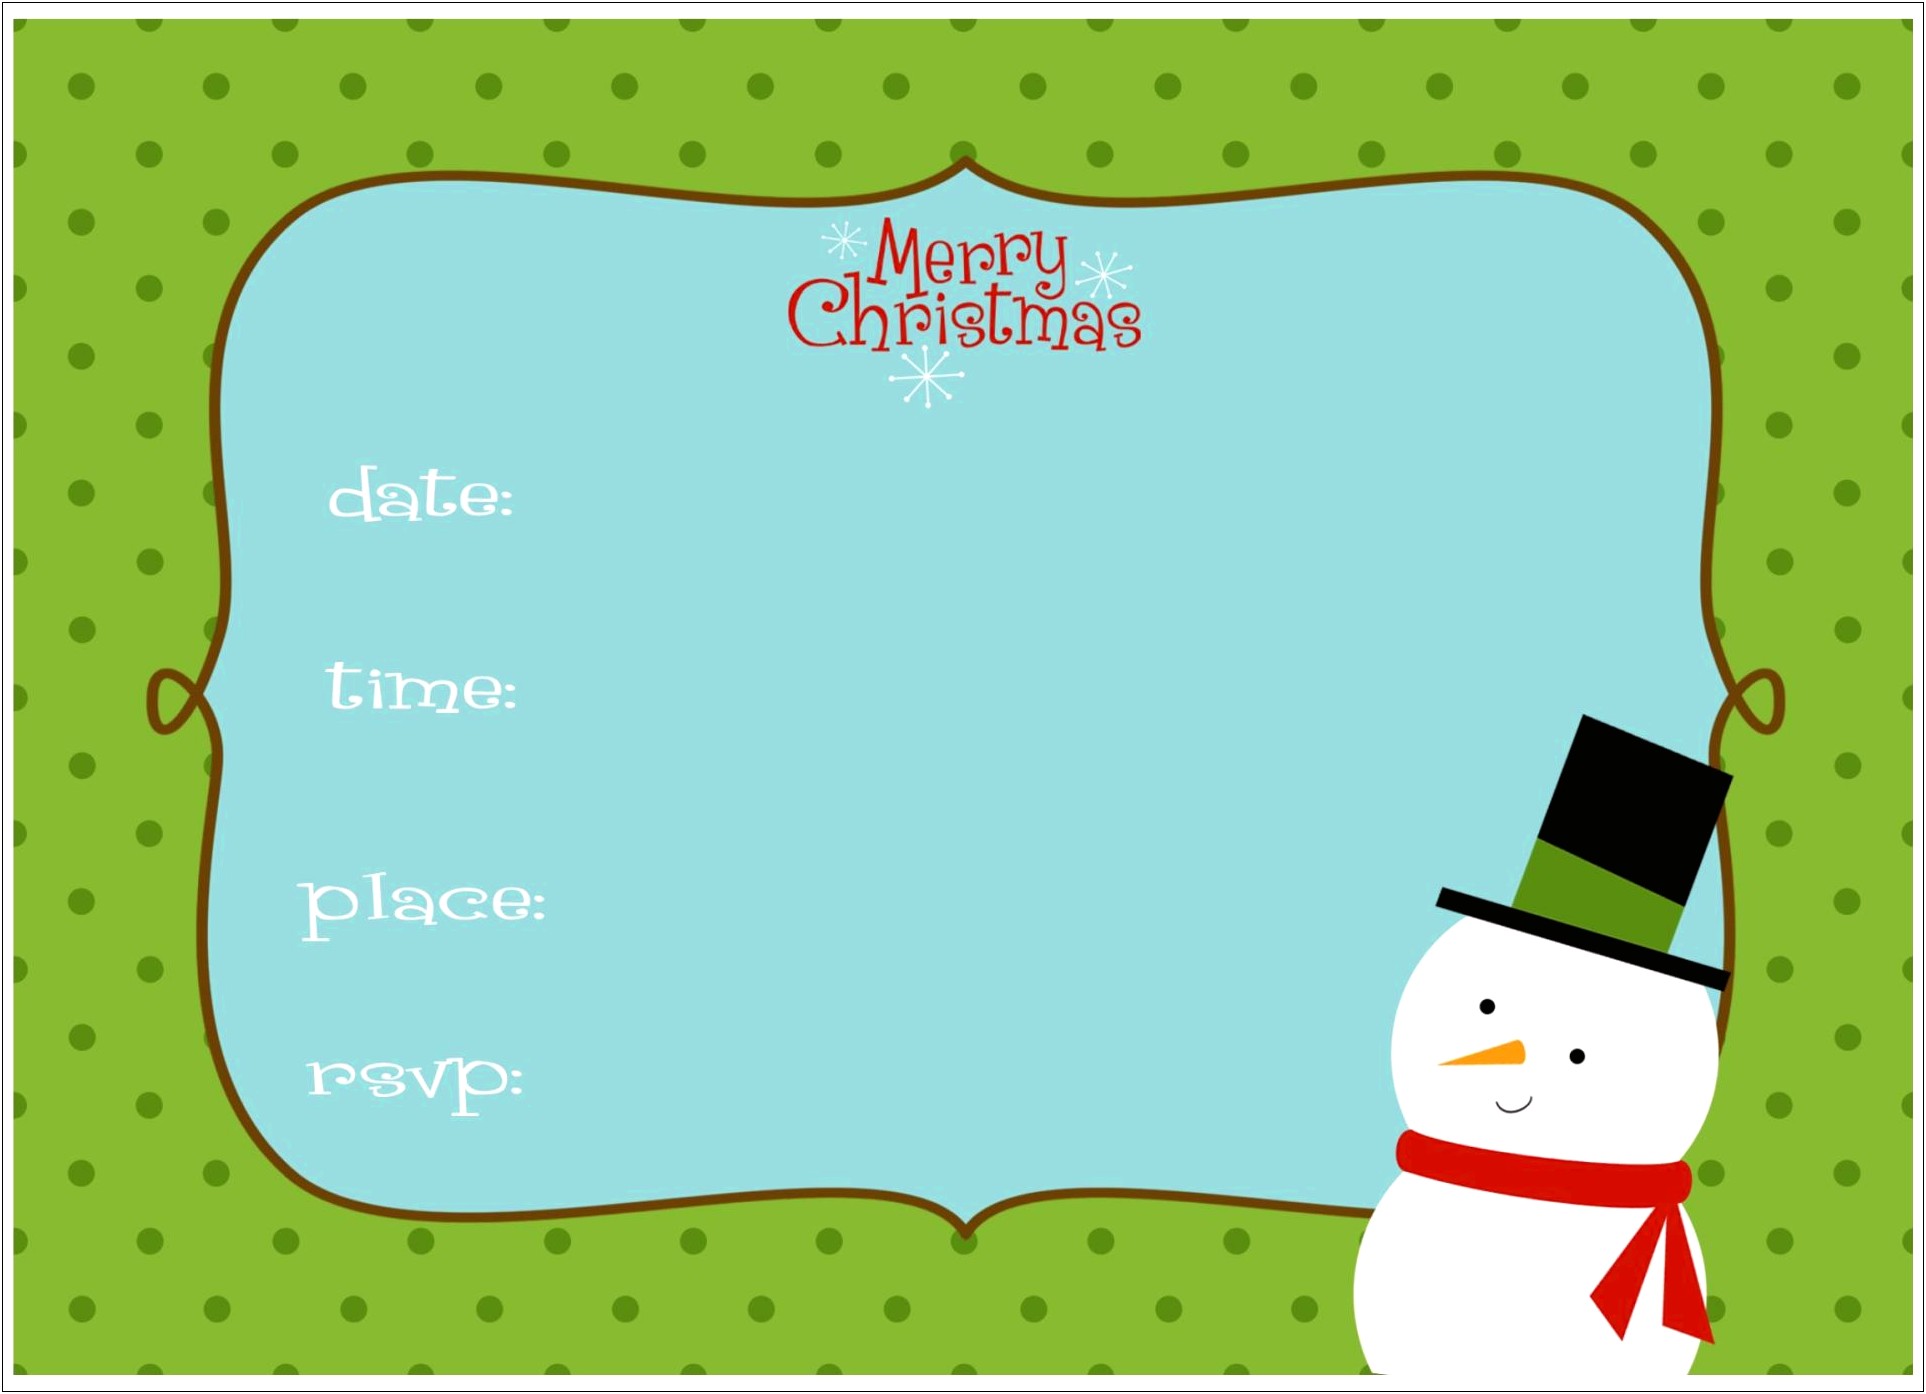 Christmas Party Save The Date Templates Free Download